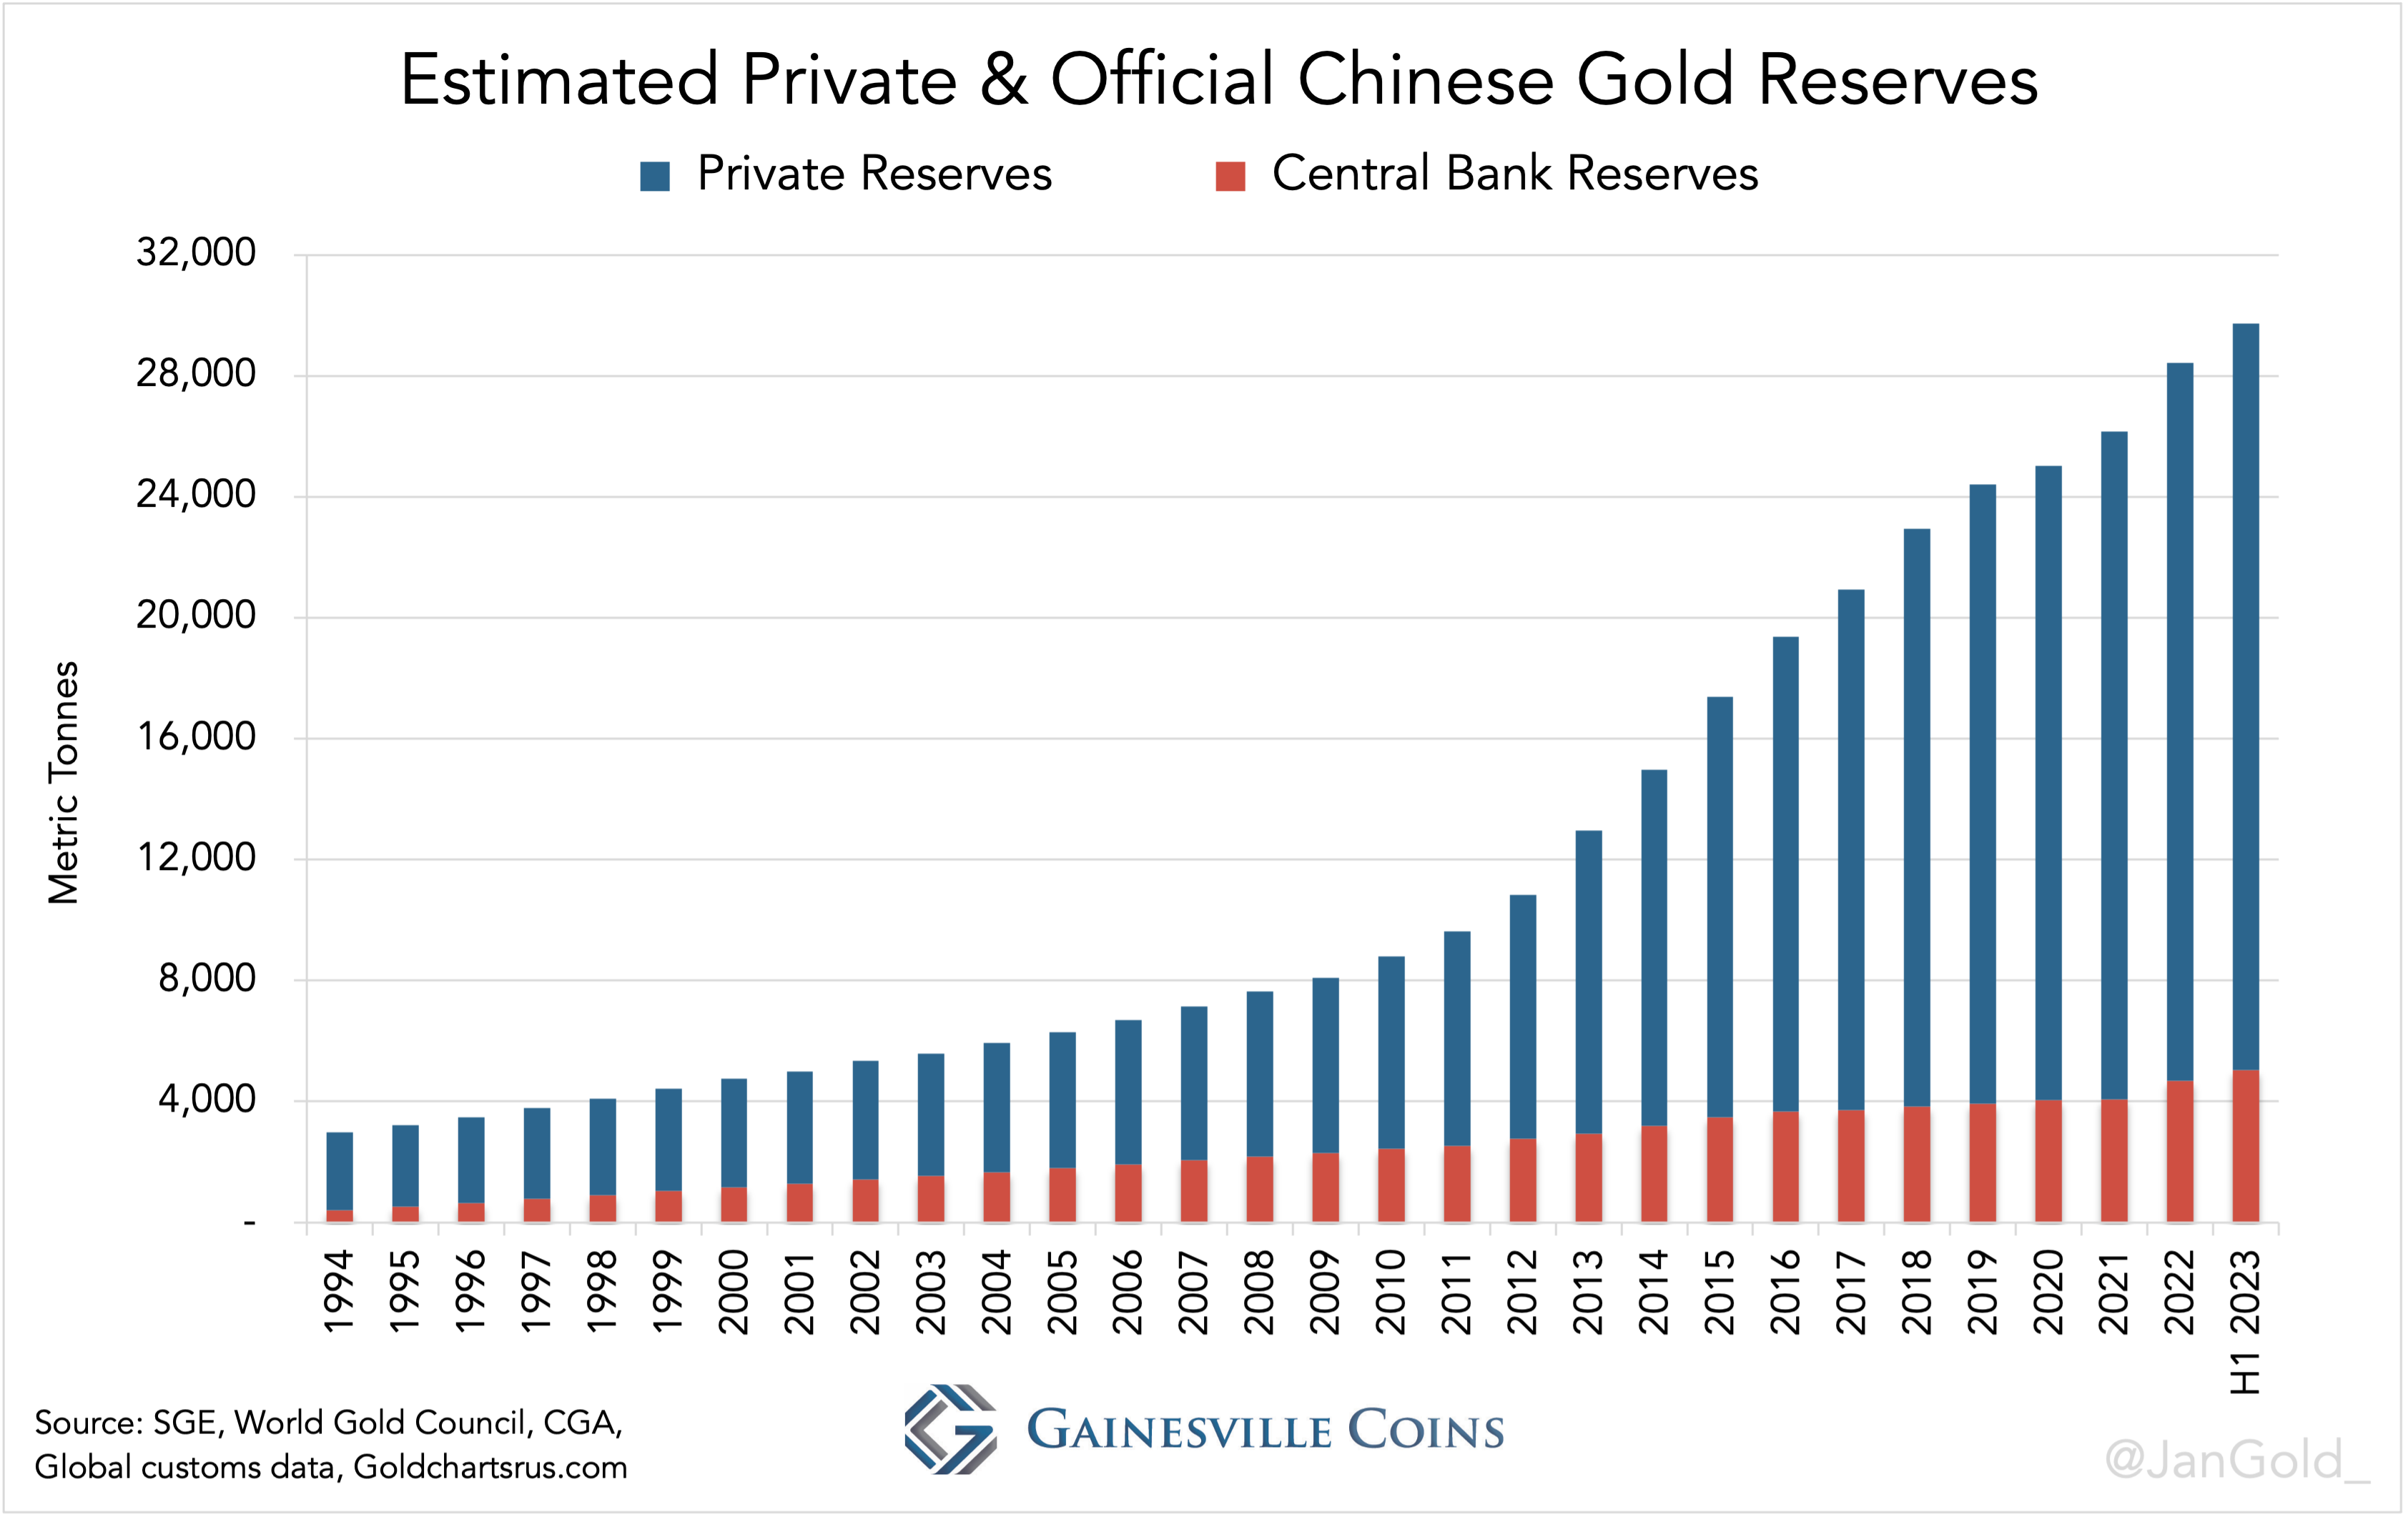 PBoC in a Hurry to Buy Gold: Covertly Bought 593t of Gold YTD